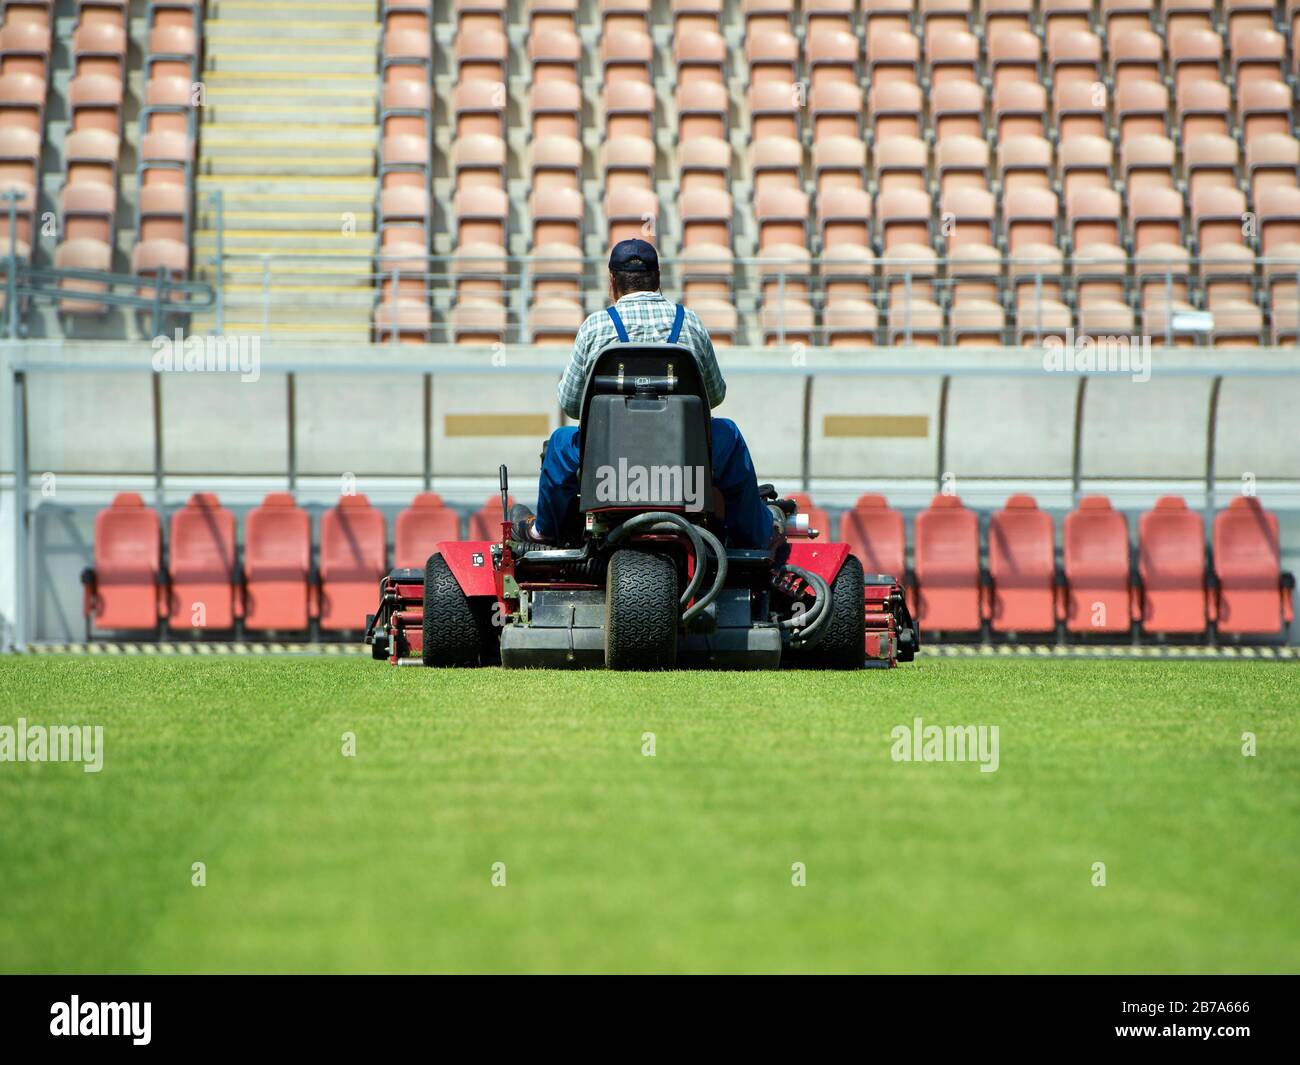 A man mowing the grass on a football stadium. Stock Photo